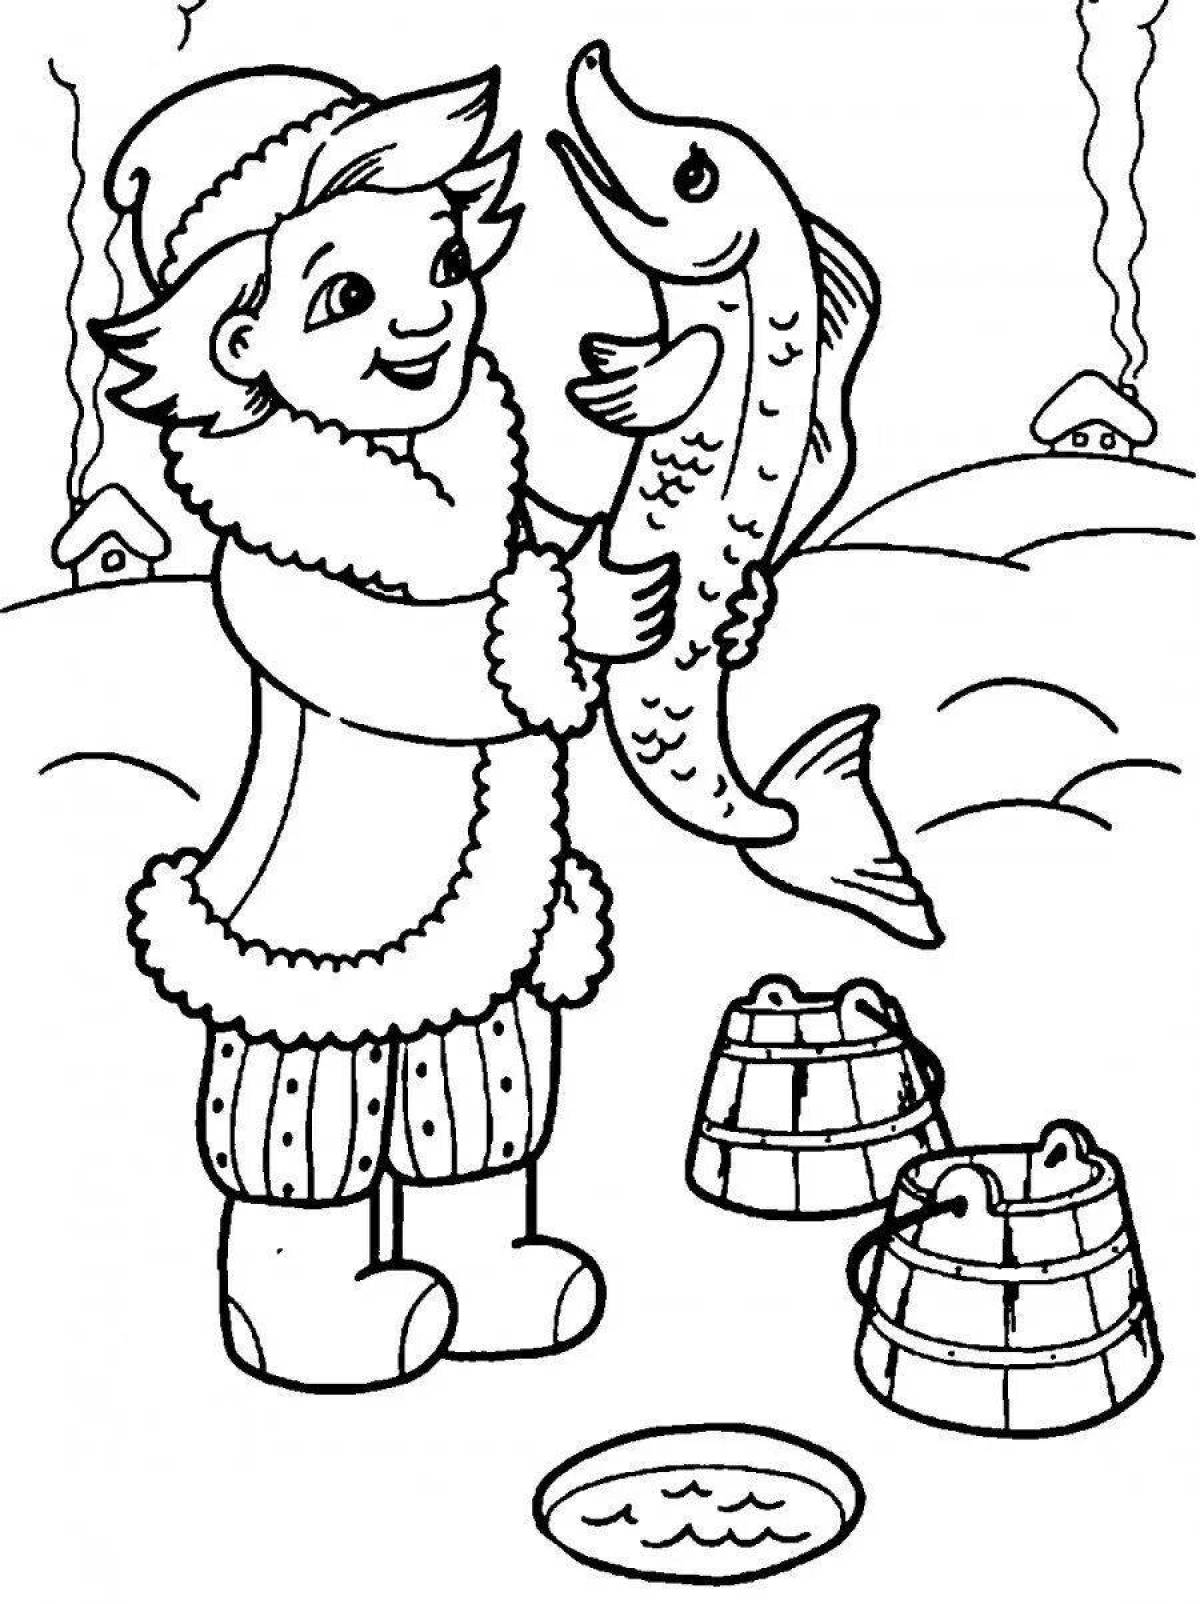 A fascinating coloring book based on Russian folk tales